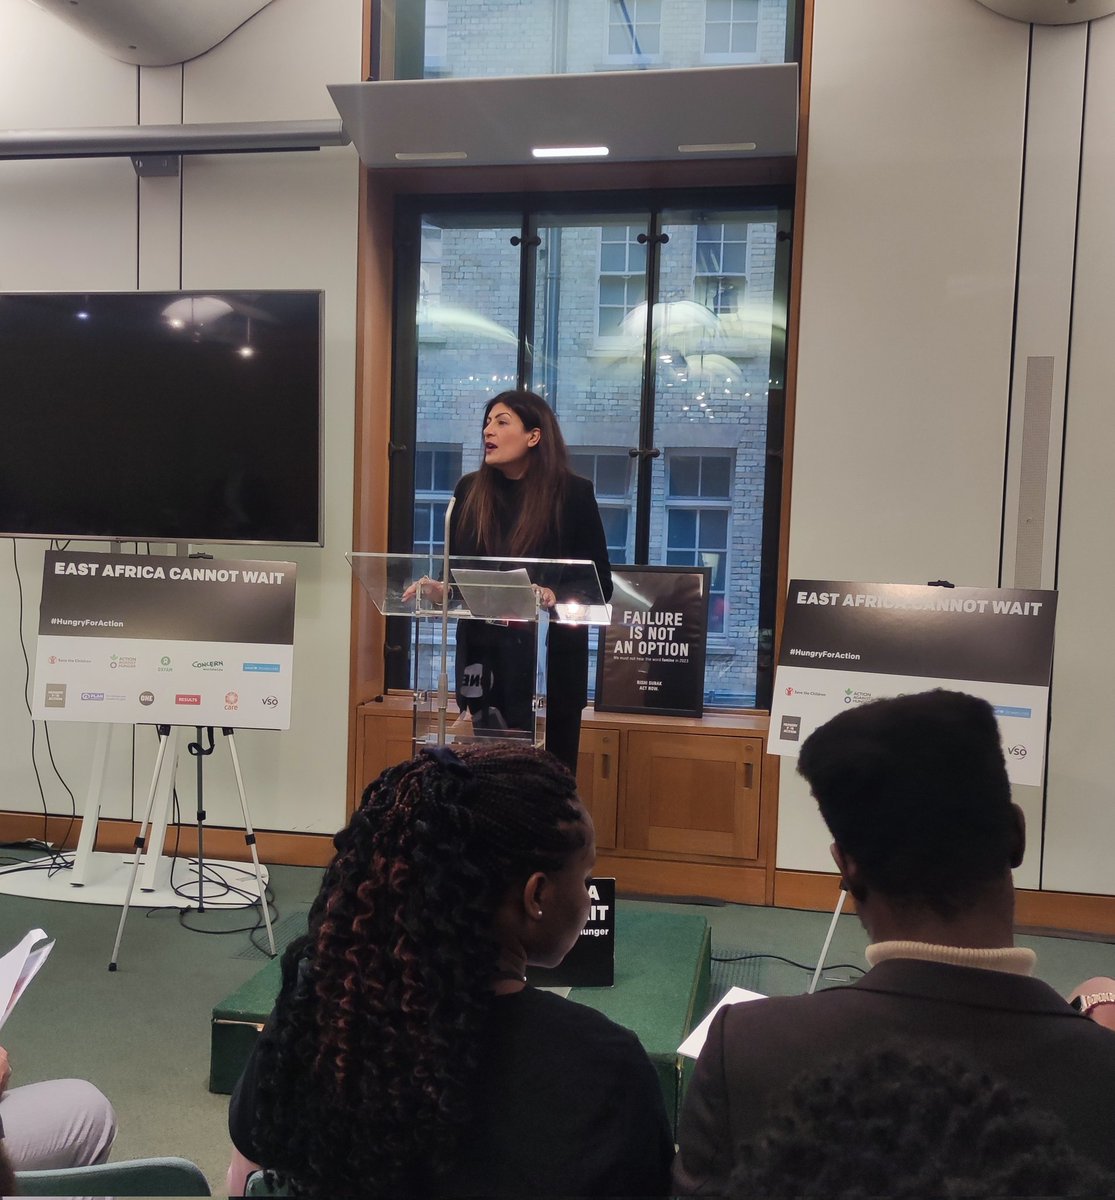 In her closing remarks for this East Africa Hunger Crisis Day of Action, @PreetKGillMP flags the importance of ensuring funding reaches local grassroot orgs, especially women-led orgs to achieve gender equality & #SDG5

#EastAfricaCannotWait 
#HungryForAction